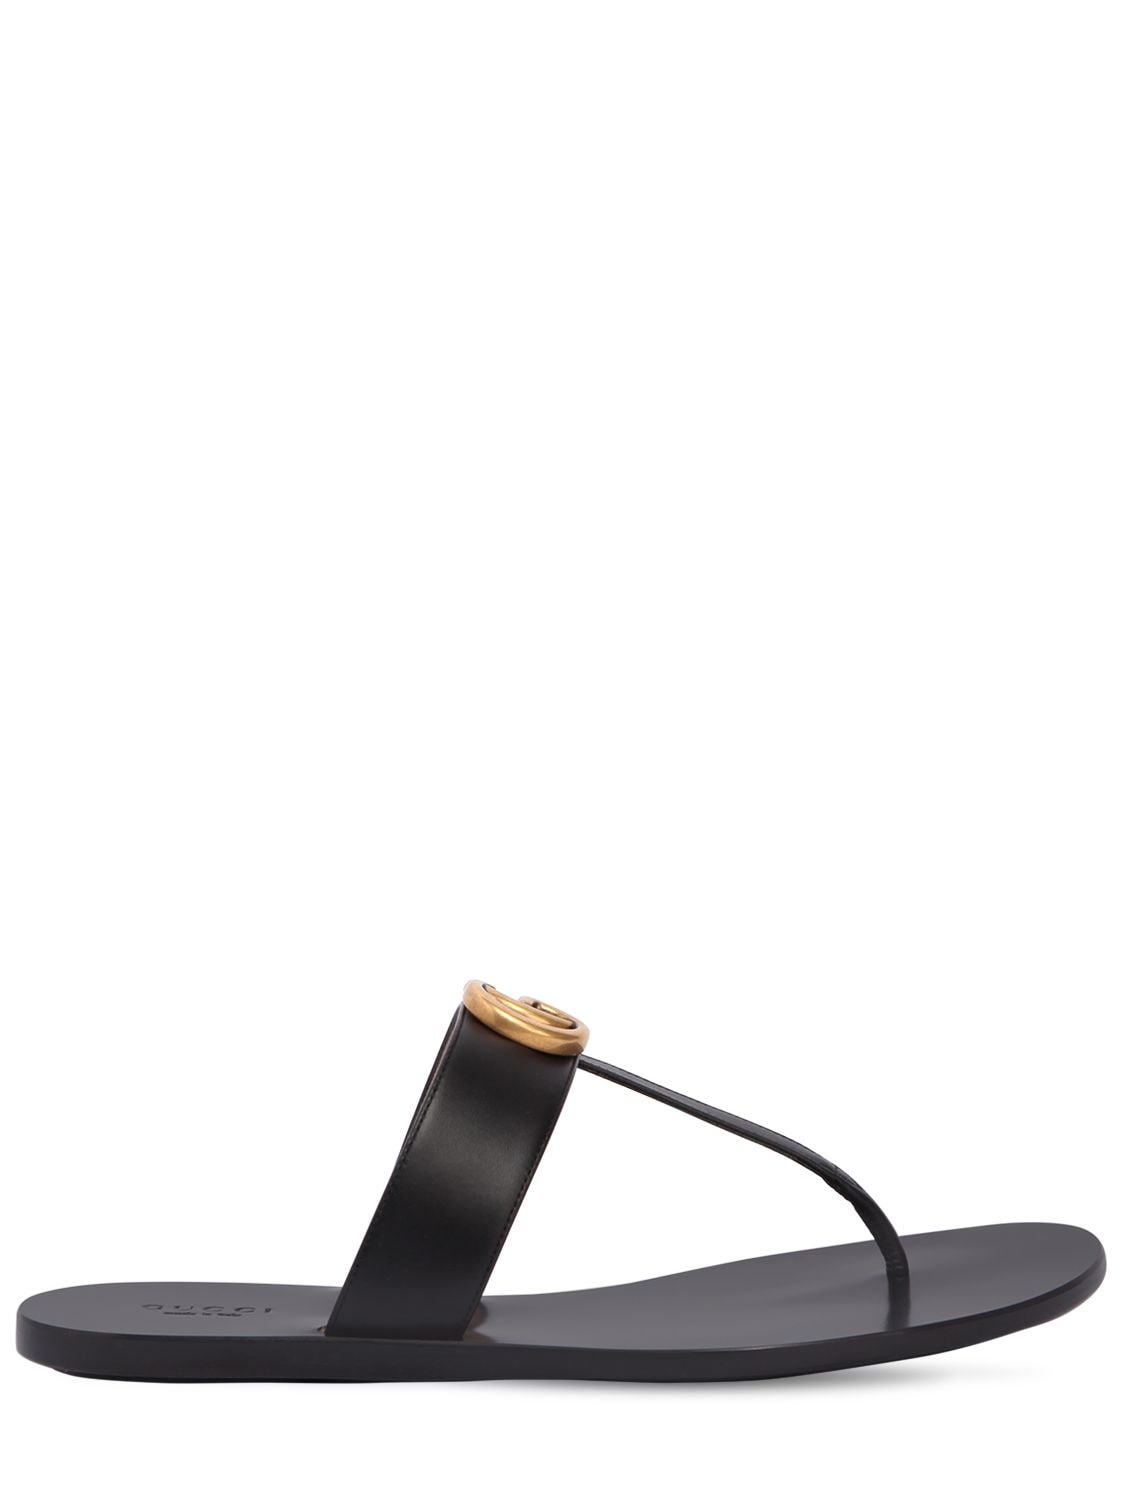 GUCCI 10mm Marmont Leather Thong Sandals